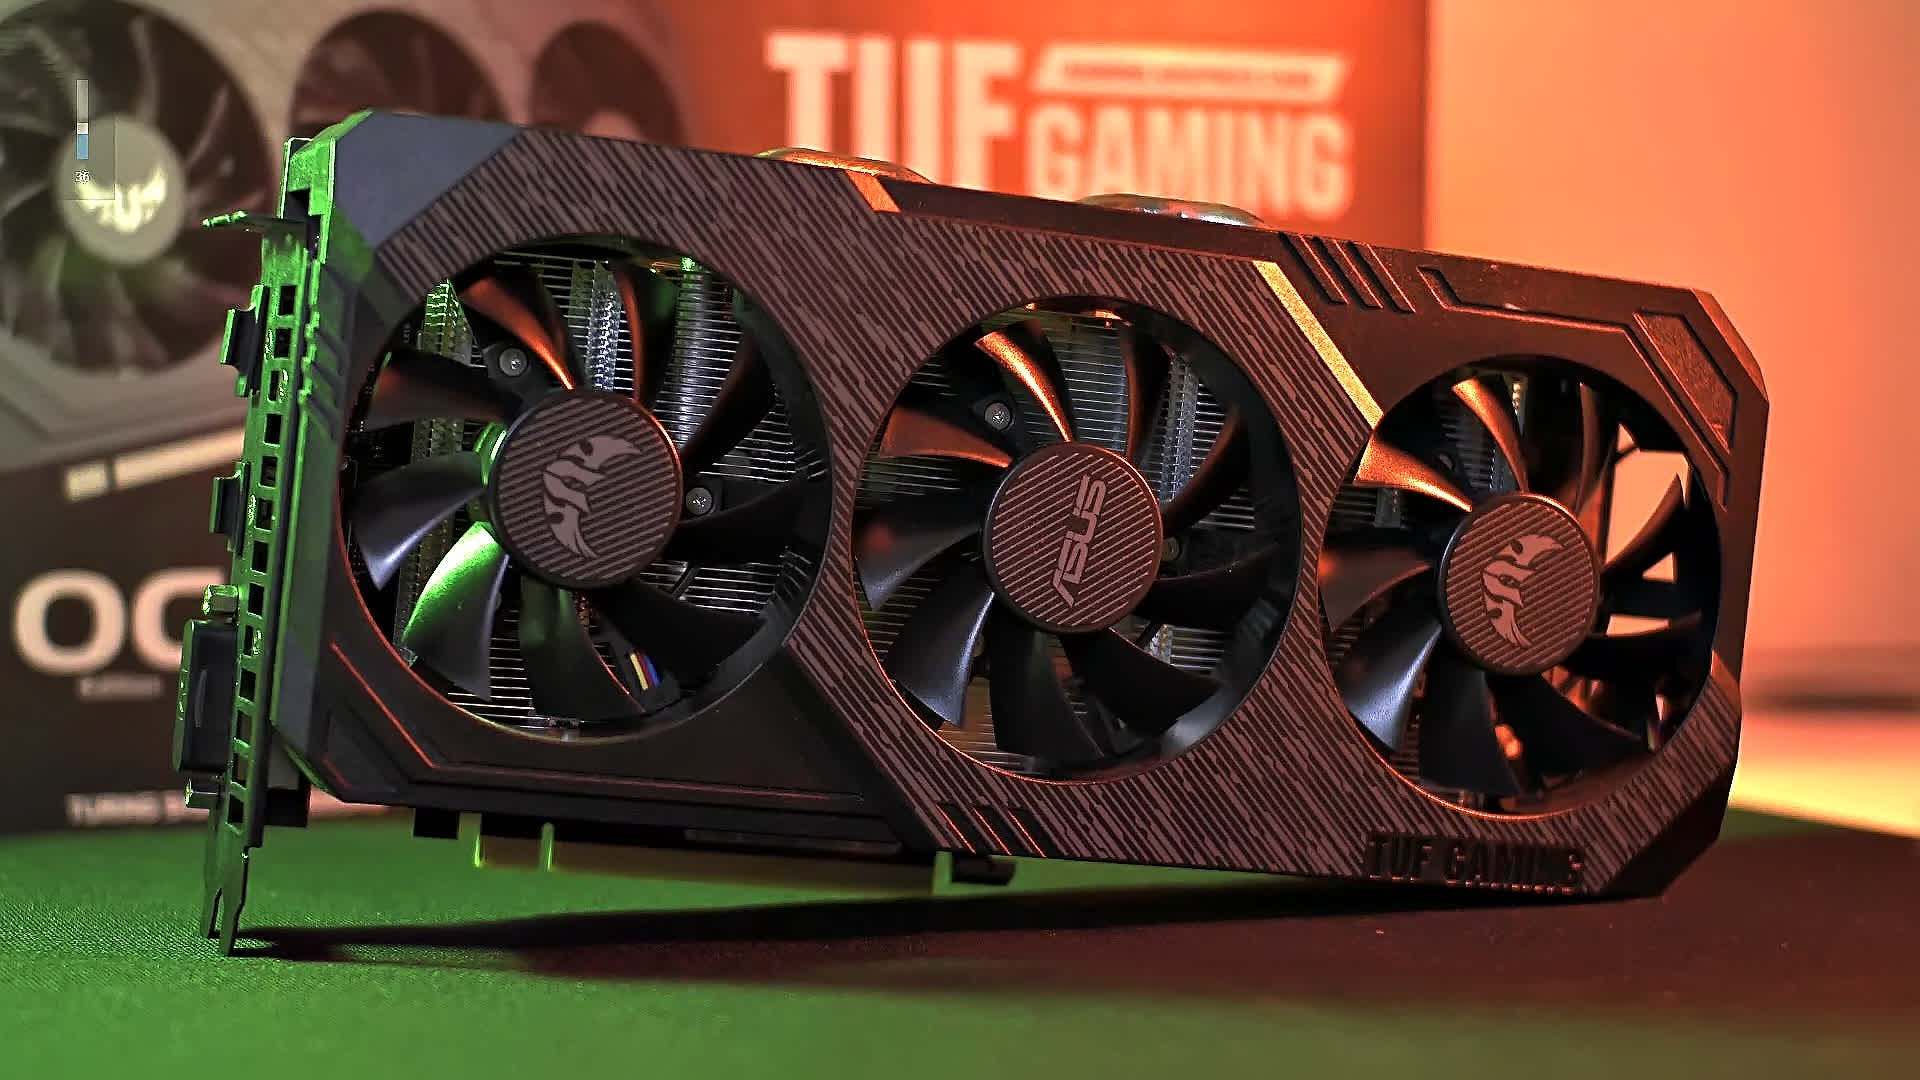 Asus will slash its GPU prices by up to 25 percent starting in April